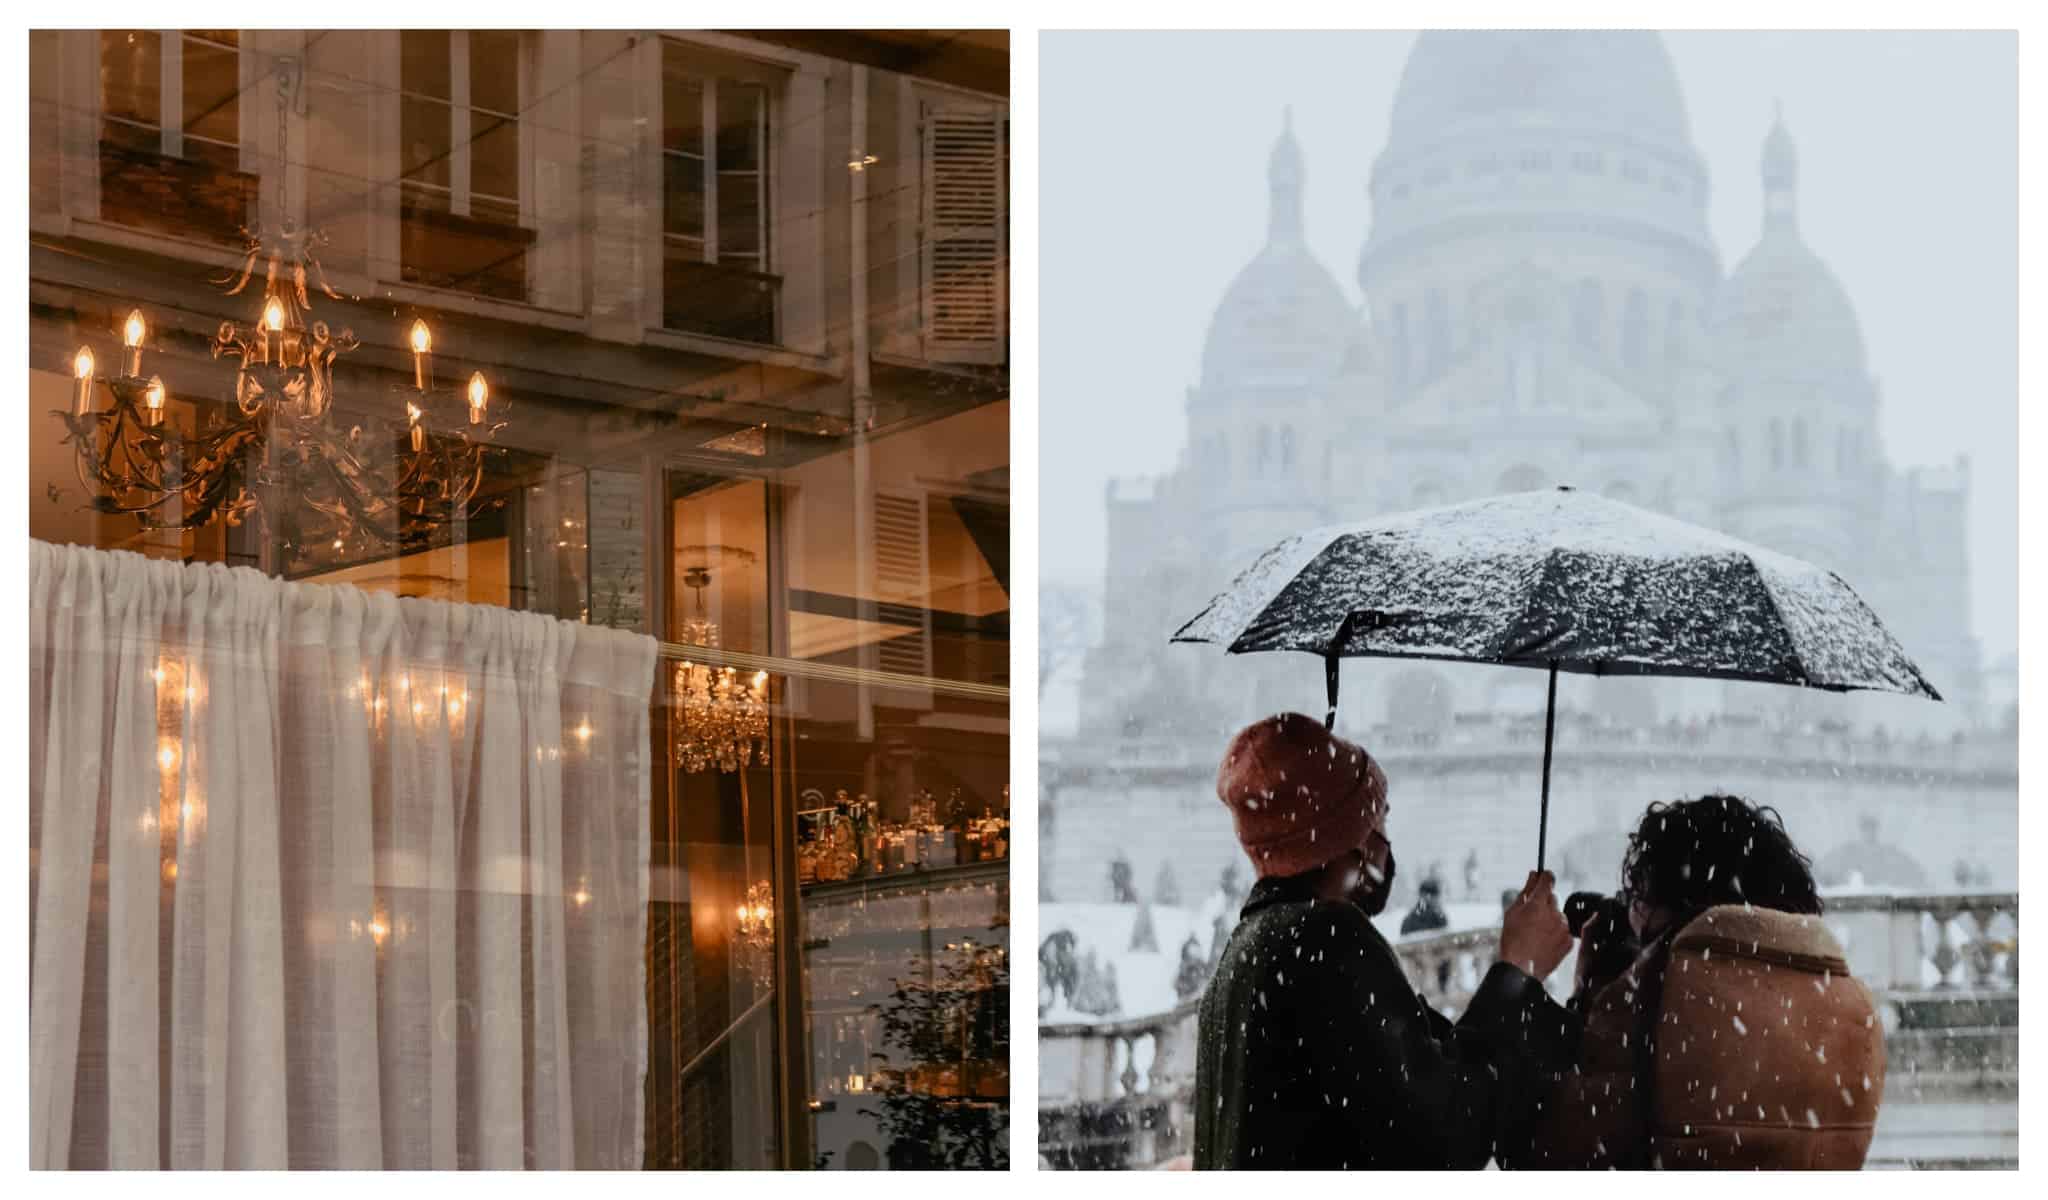 Left: a cafe exterior in Paris with a reflection of Haussmanian building, Right: snowfall in Montmartre with the Sacre Coeur Paris in the background covered with snow